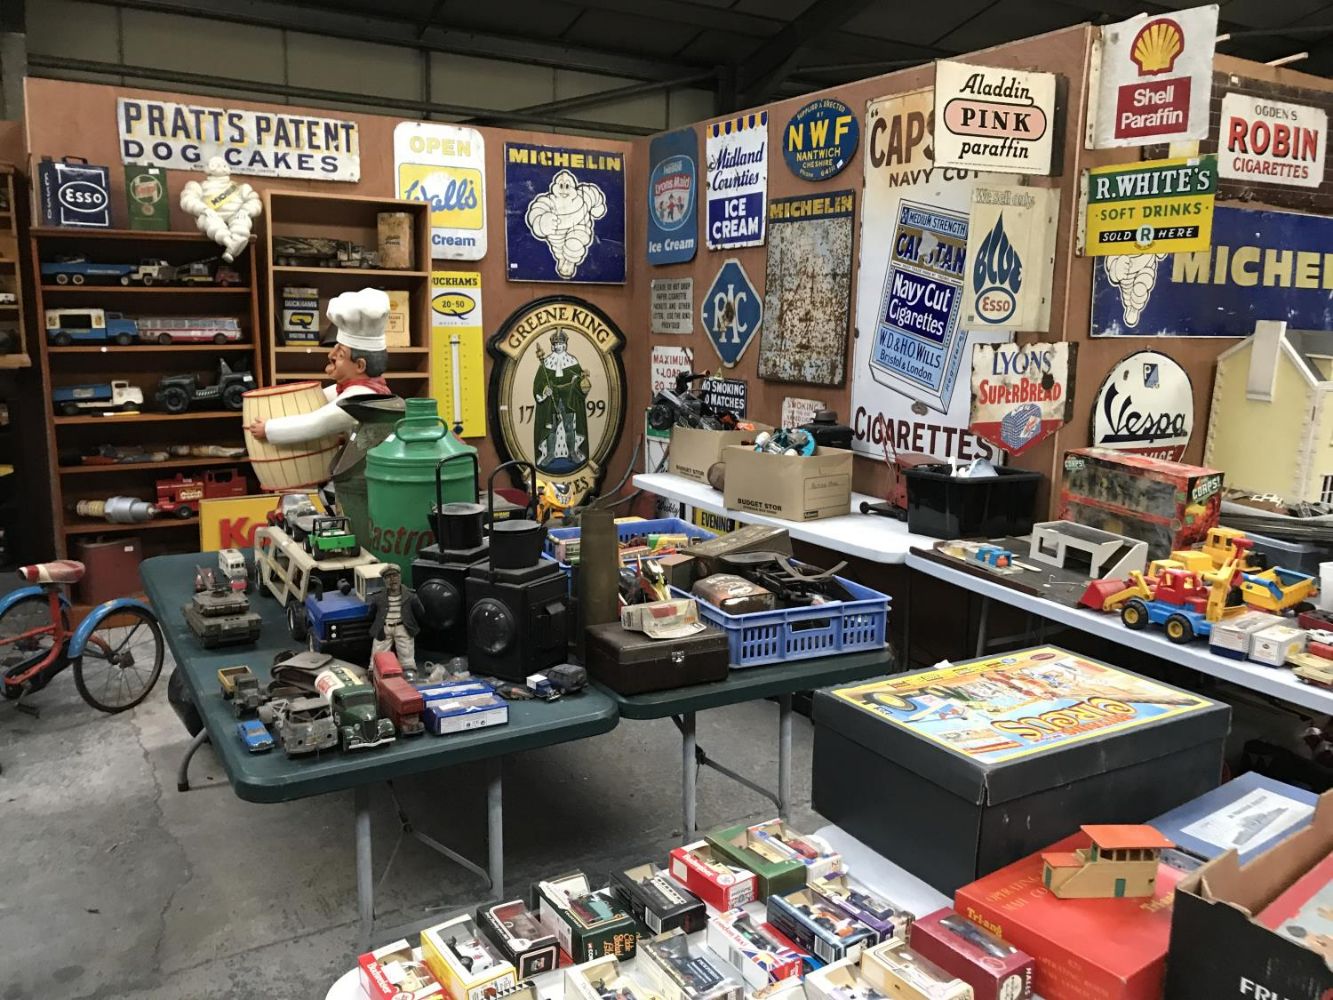 Two Day Auction Of Collectables, Antiques, Furniture, Vintage Items - special section for Militaria